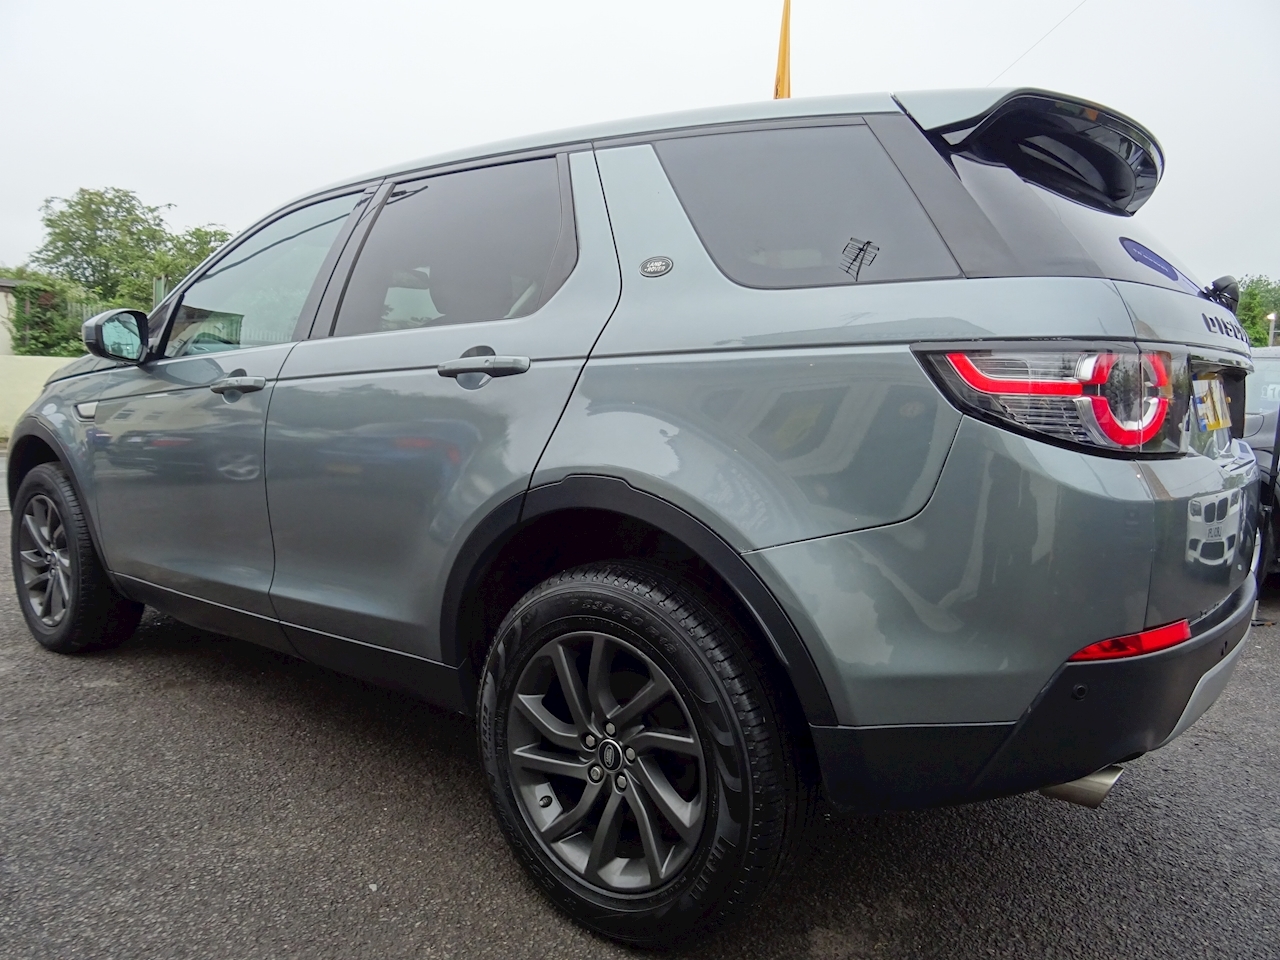 Discovery Sport 2.0 TD4 HSE SUV 5dr Diesel Auto 4WD (s/s) (180 ps)